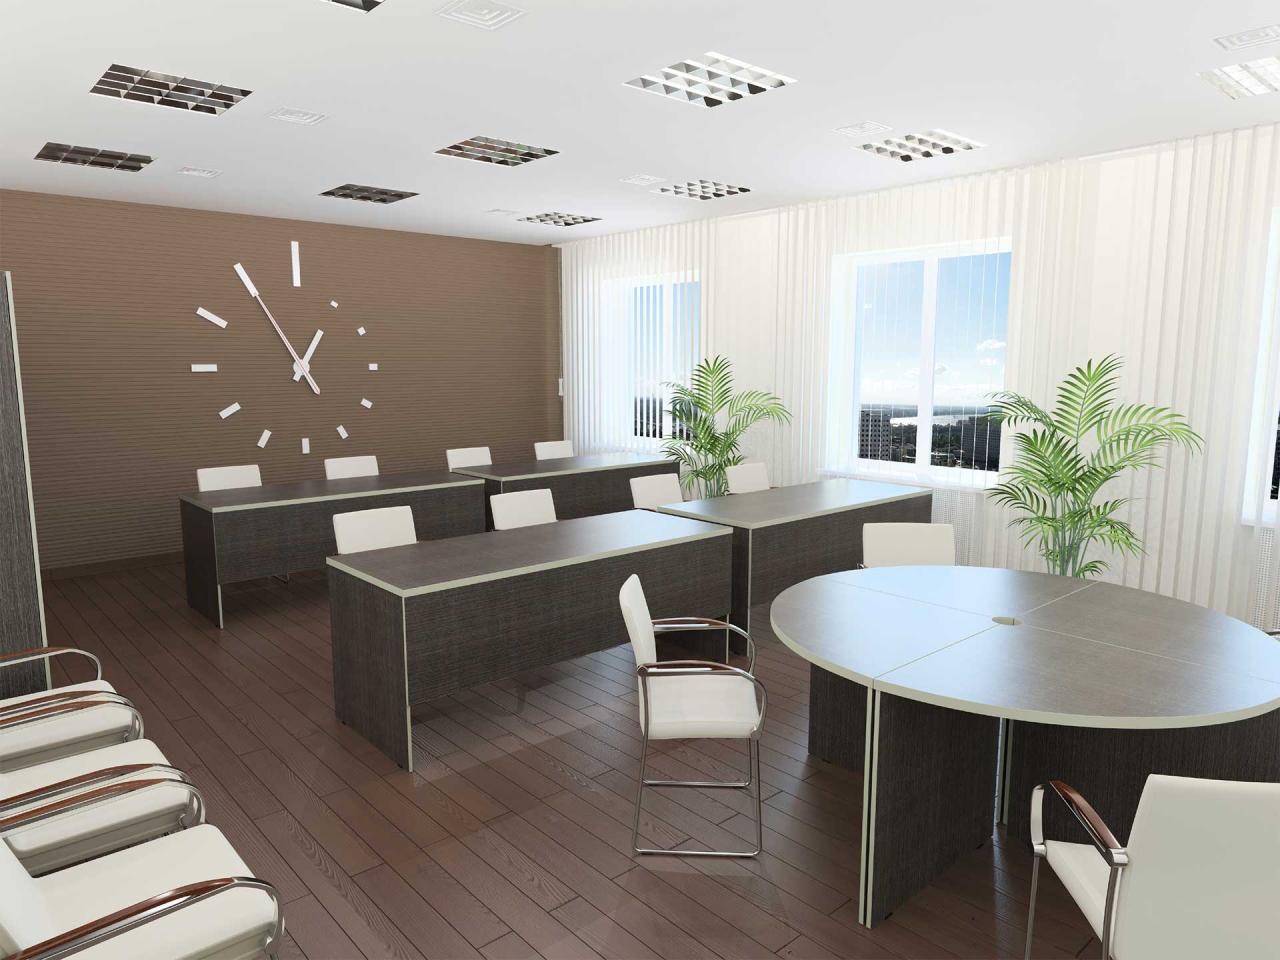 How A Clean Office Makes For A More Productive Office